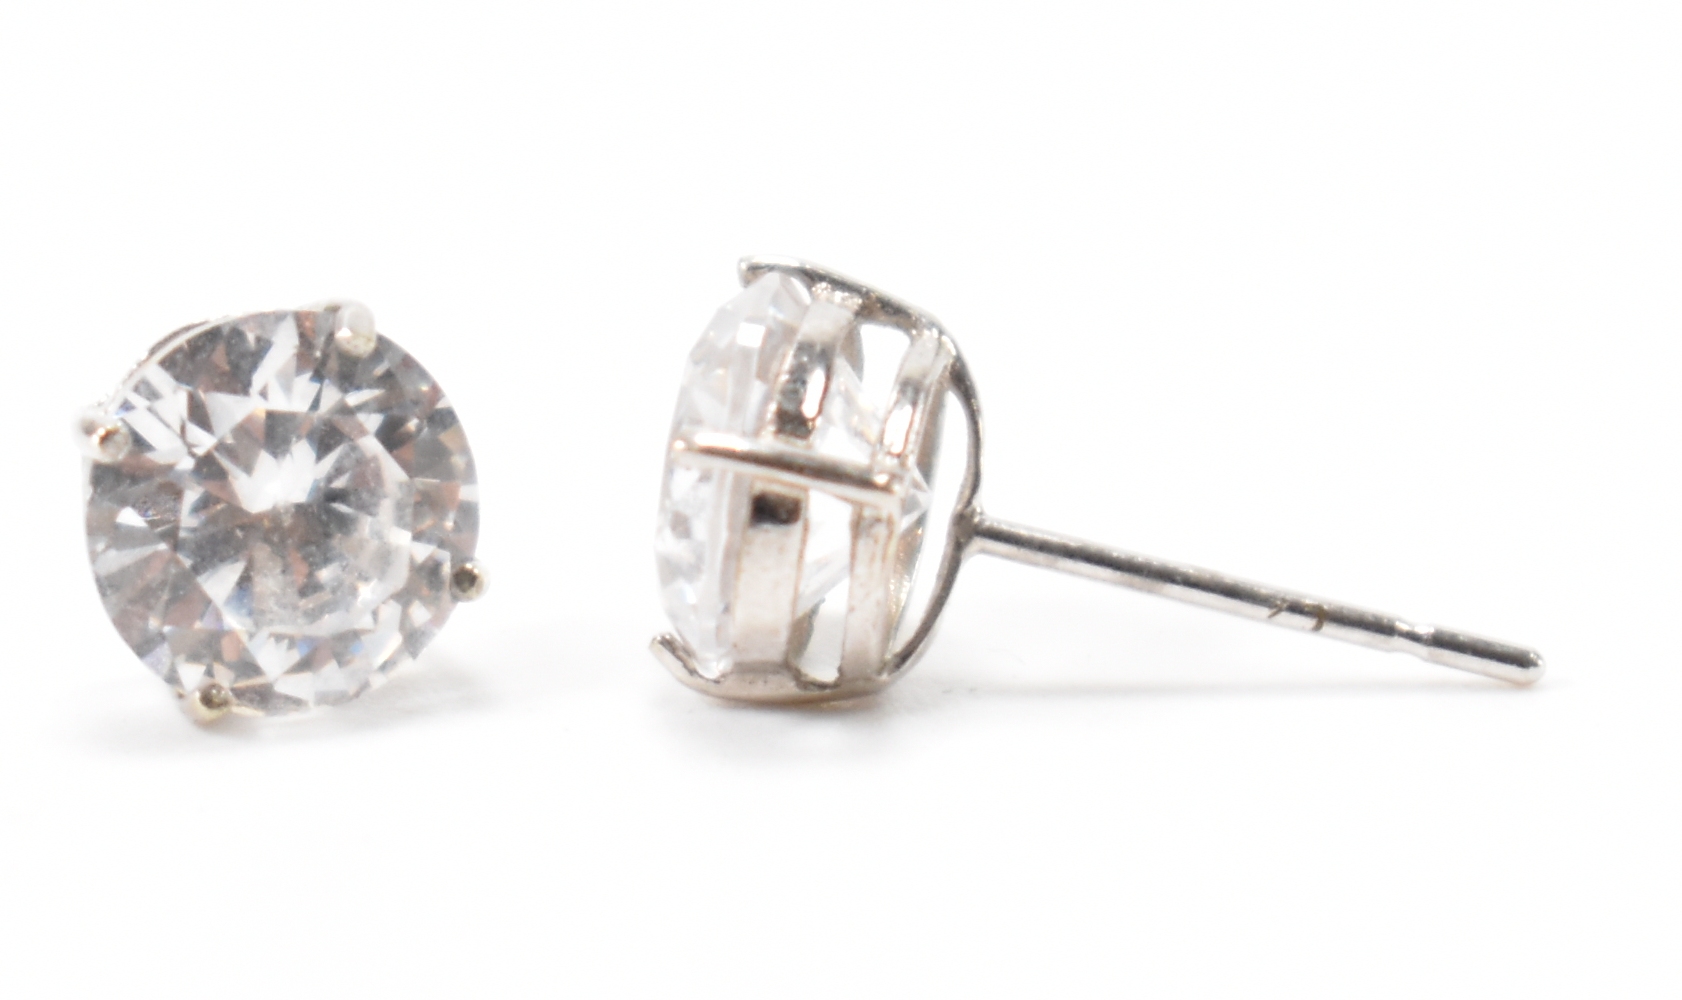 PAIR OF 9CT WHITE GOLD & CZ STUD EARRINGS - Image 2 of 5